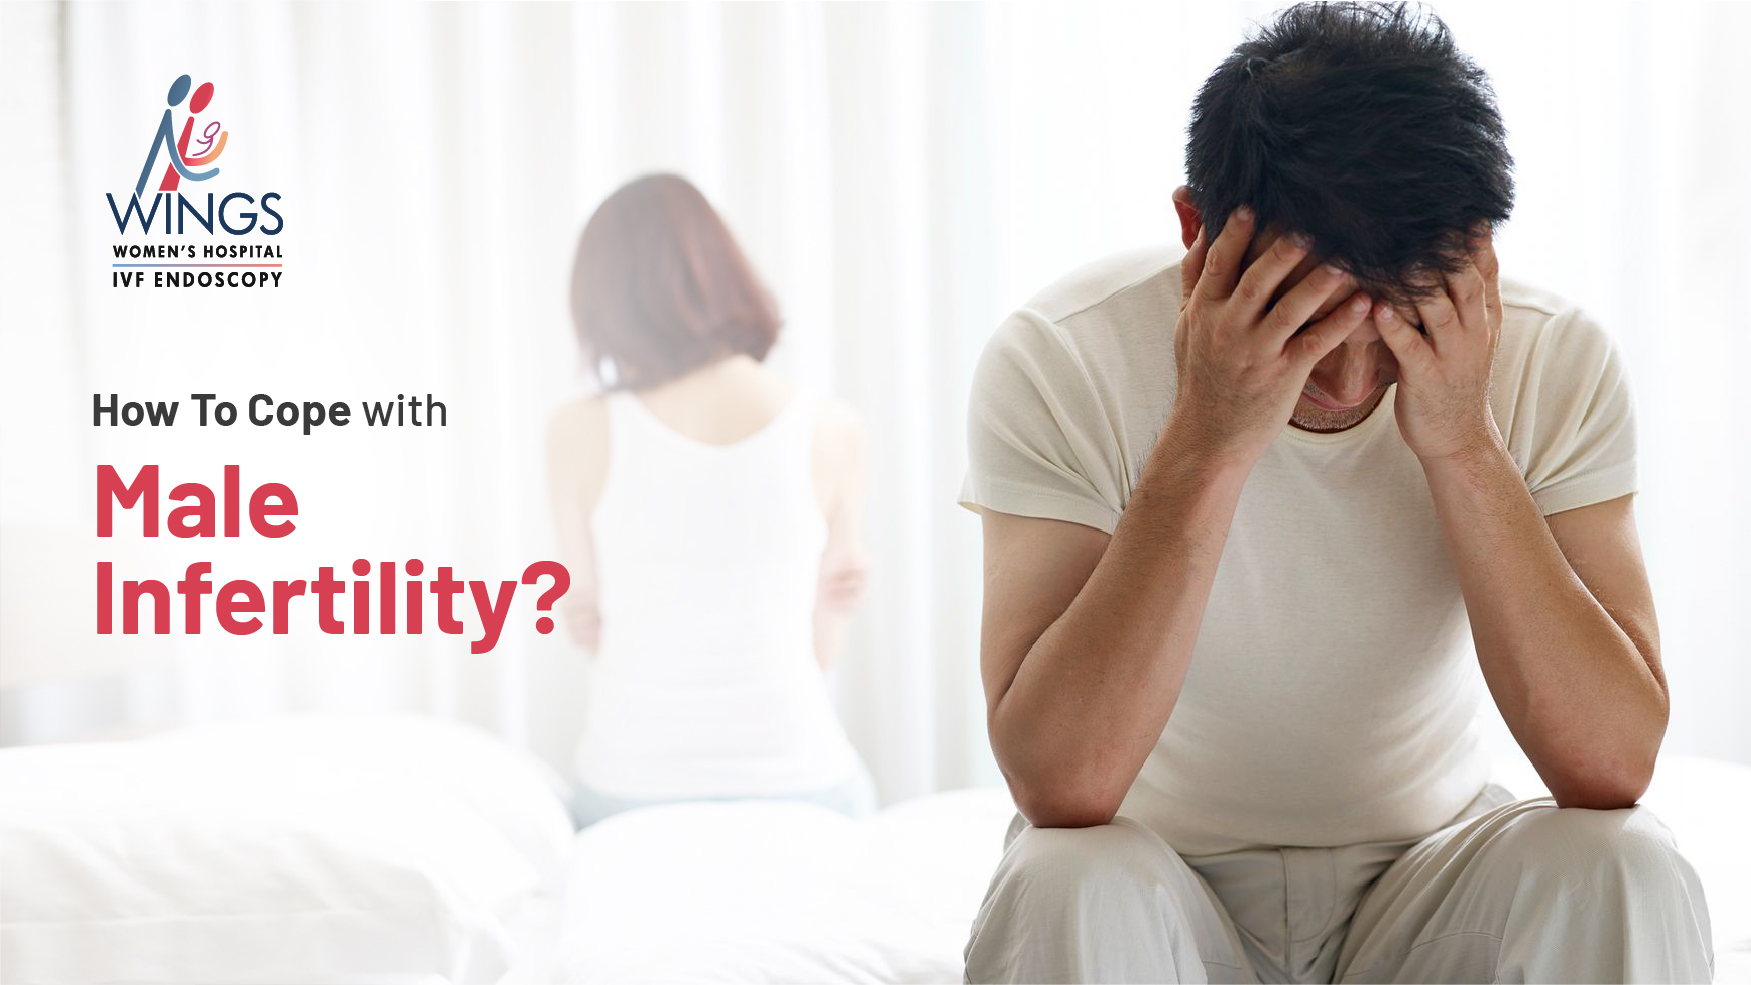 How To Cope with Male Infertility?